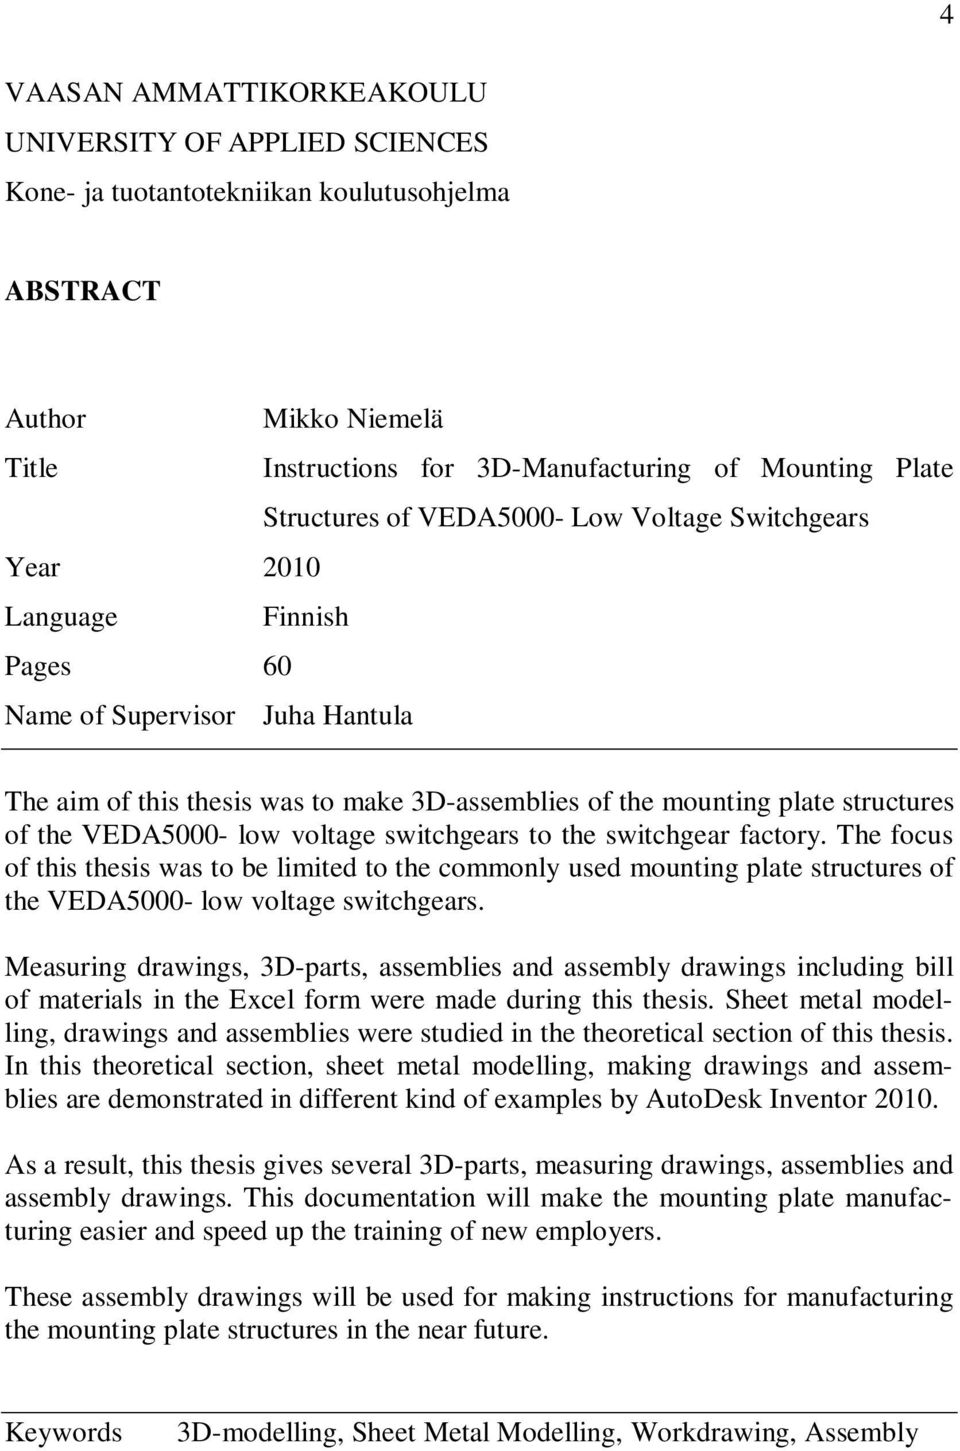 of the VEDA5000- low voltage switchgears to the switchgear factory. The focus of this thesis was to be limited to the commonly used mounting plate structures of the VEDA5000- low voltage switchgears.